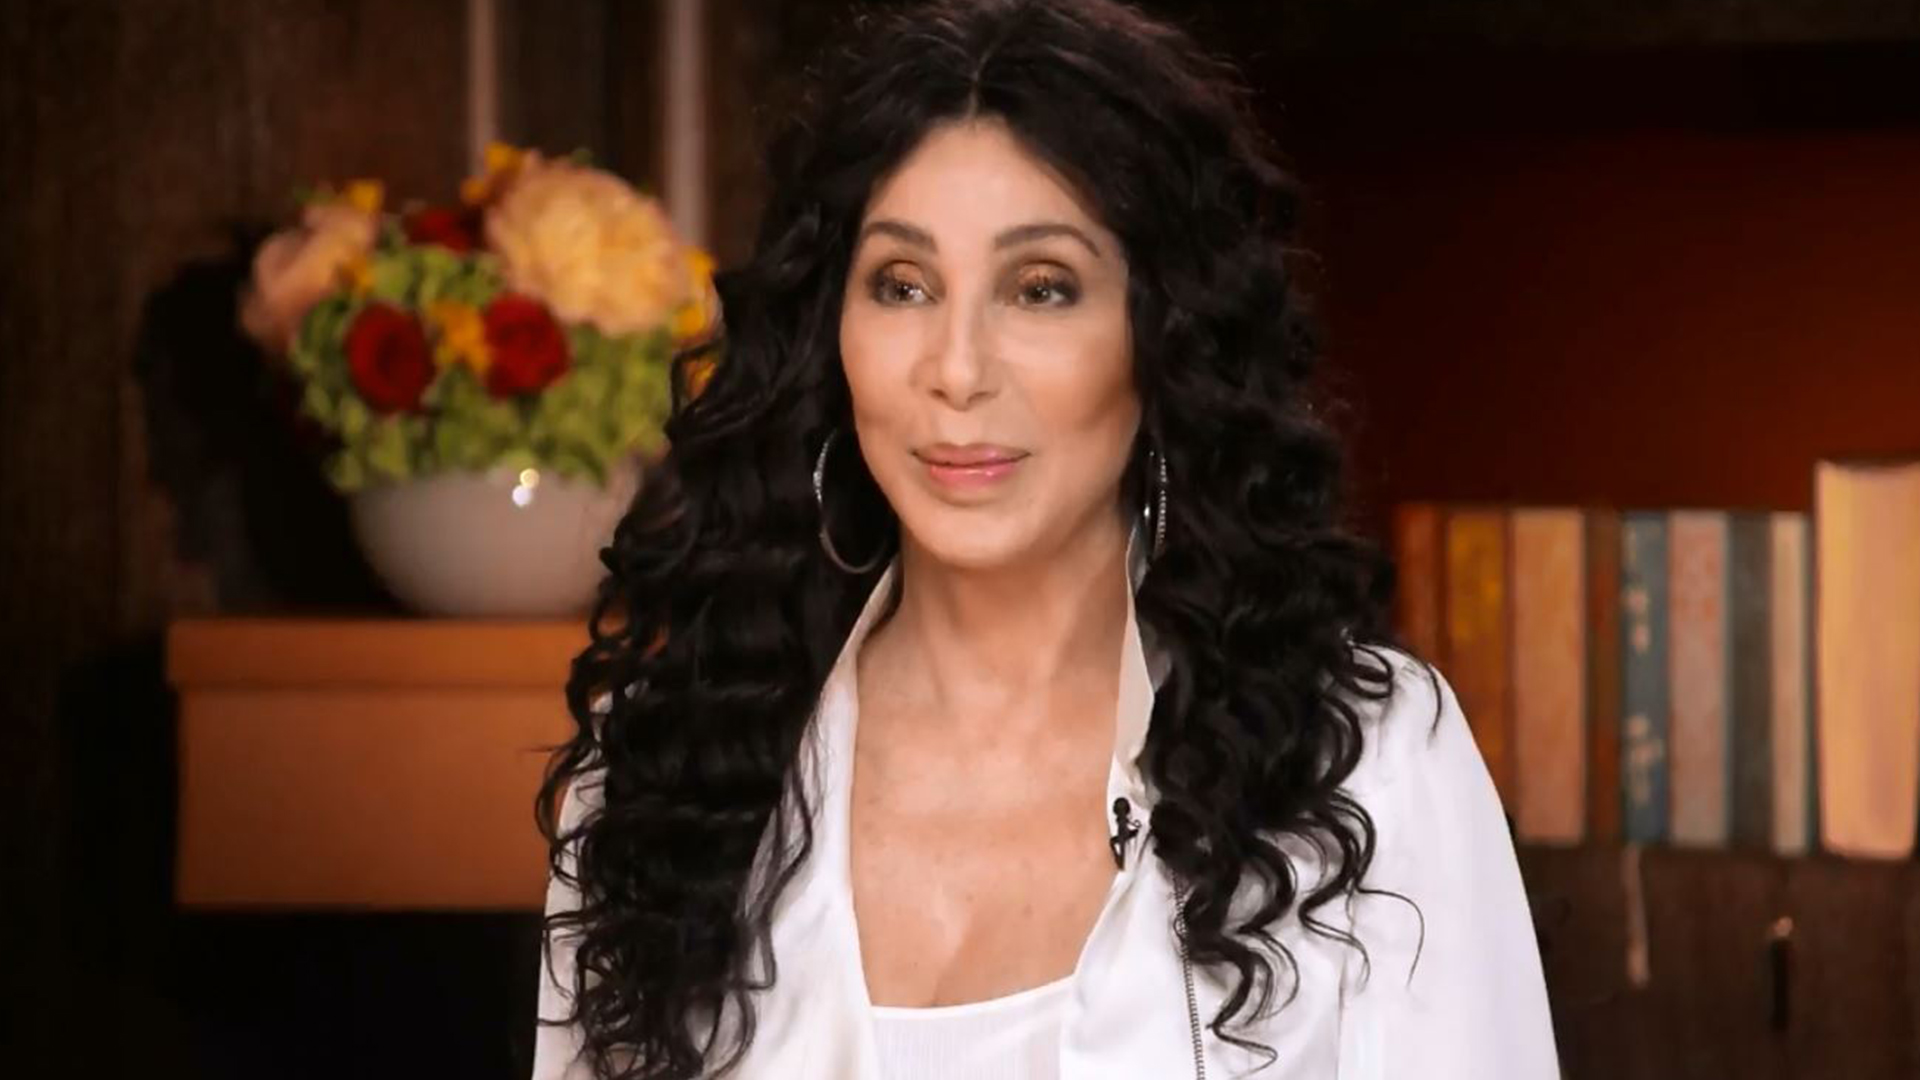 How old is Cher